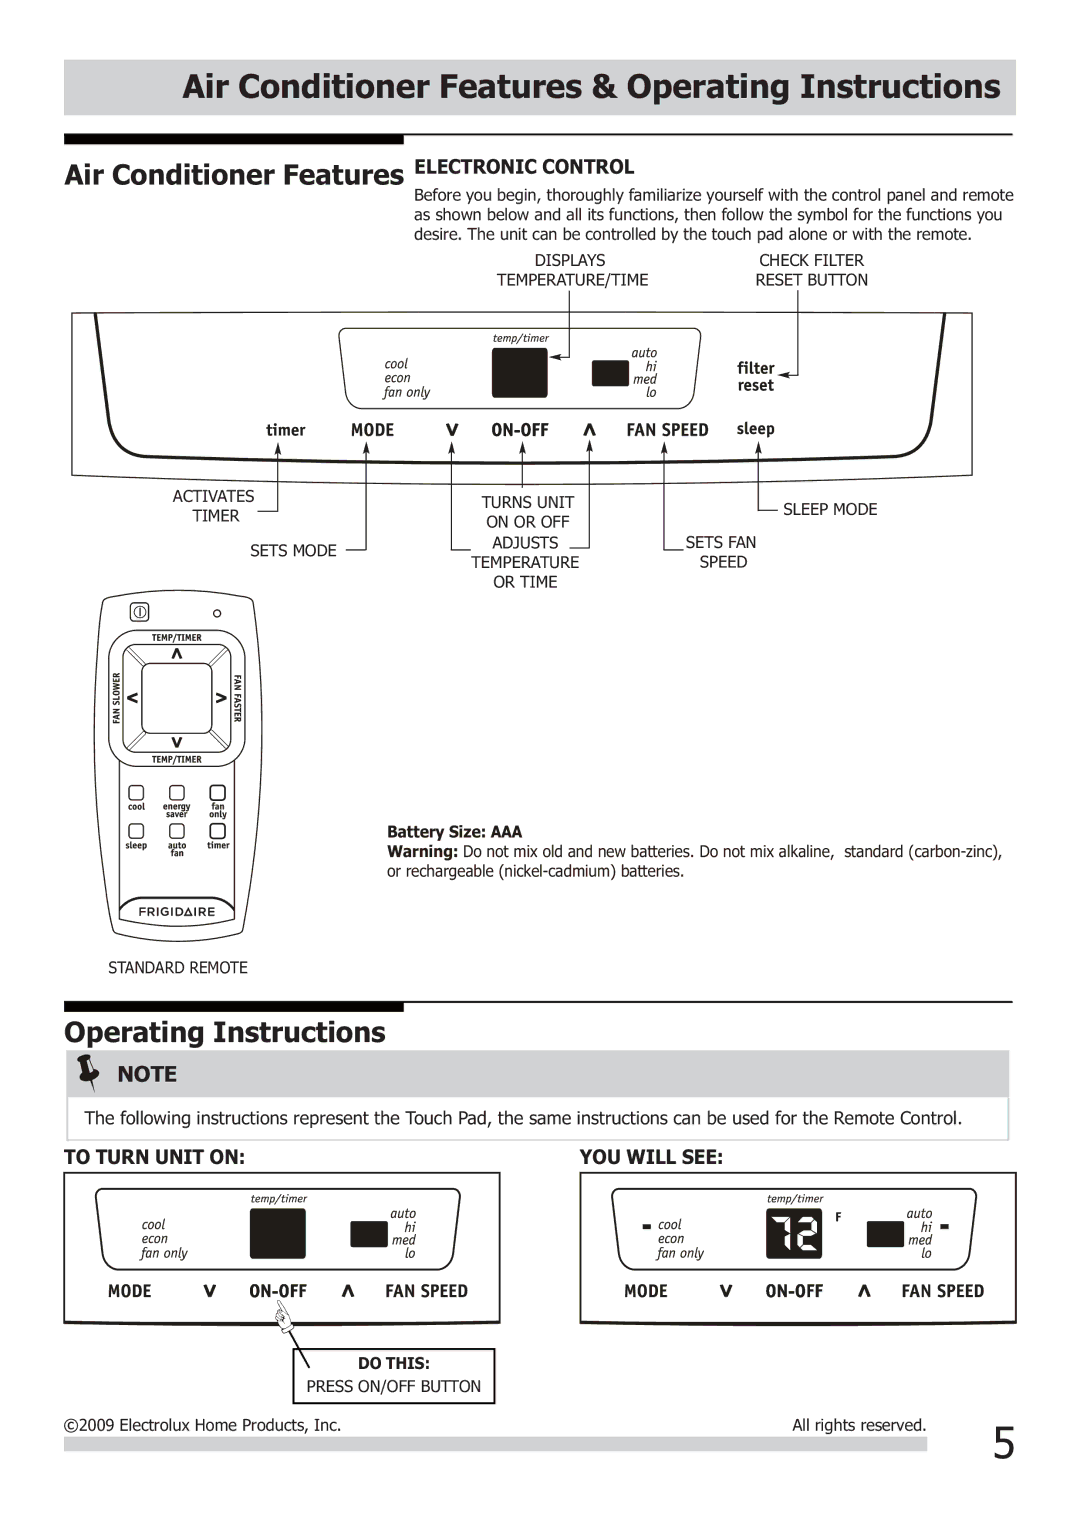 Frigidaire FRA064VU1 Air Conditioner Features & Operating Instructions, To Turn Unit on YOU will see 